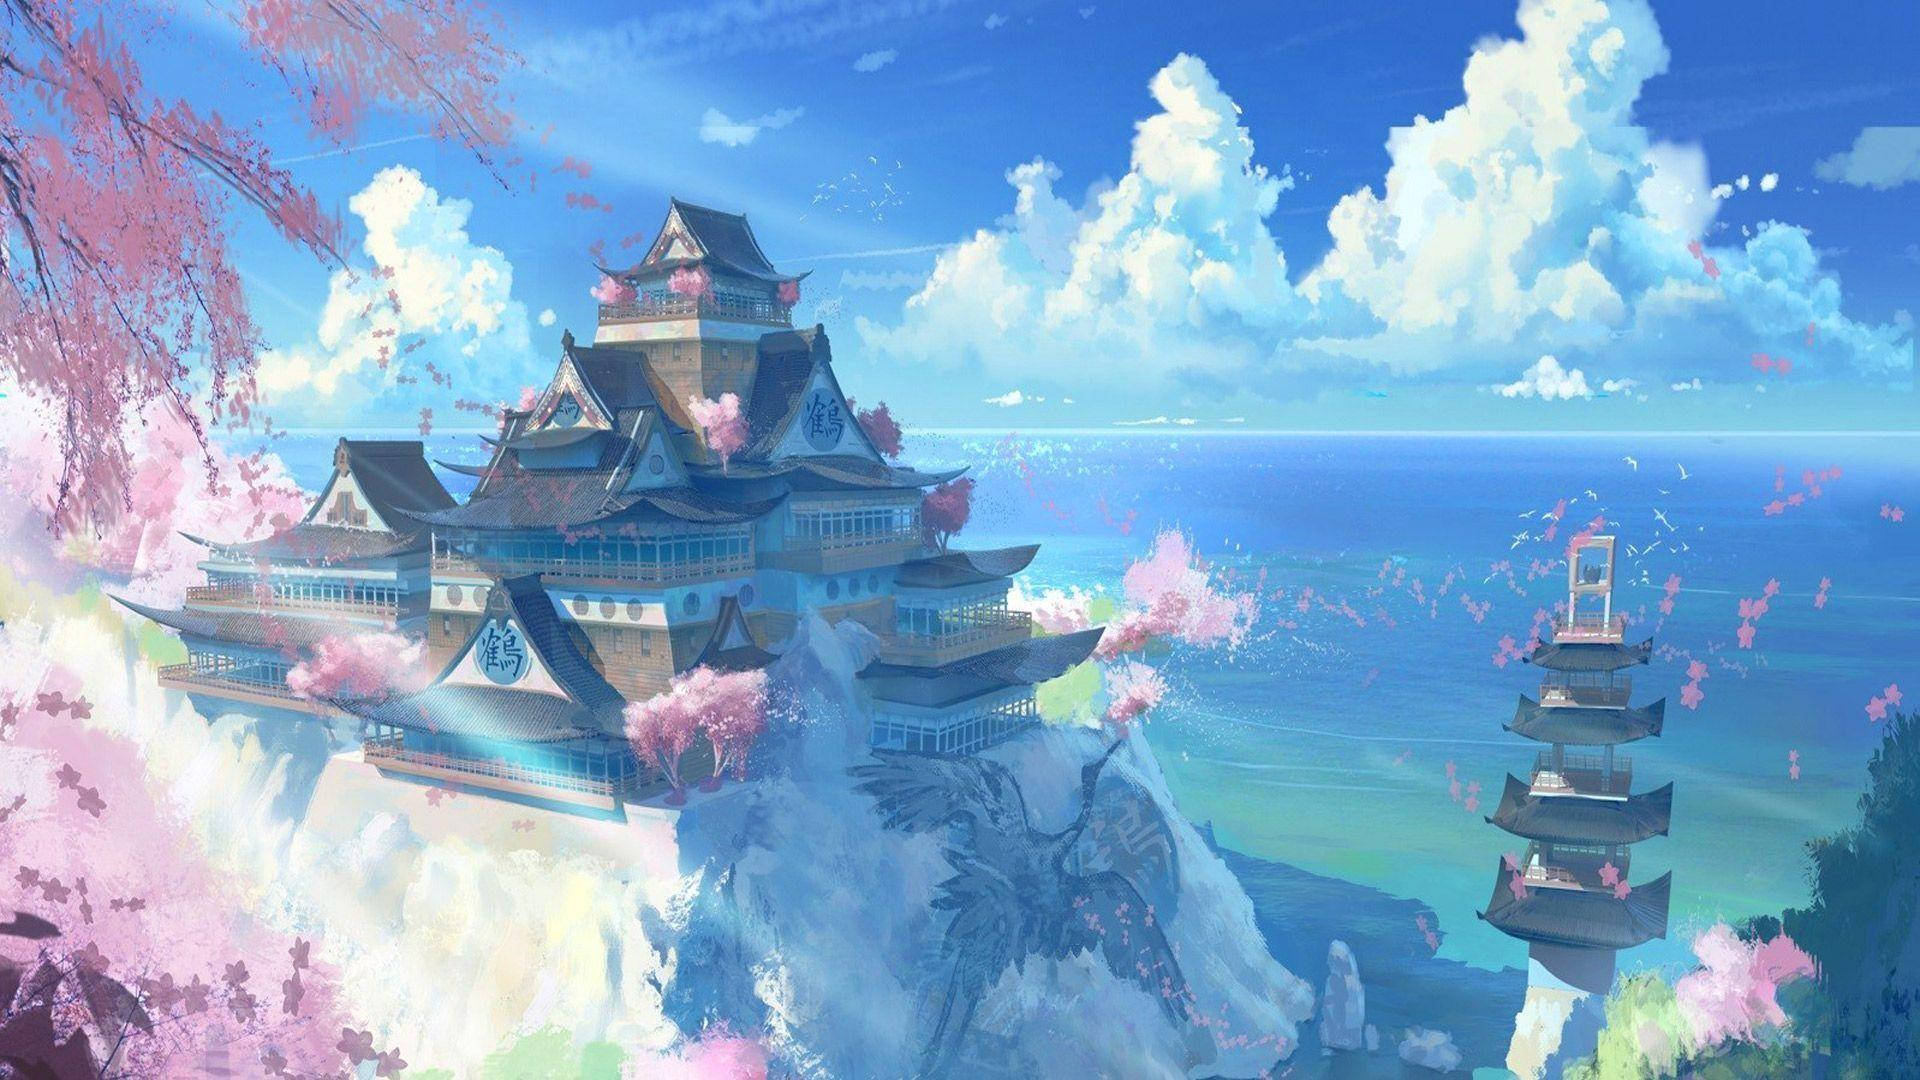 Aesthetic Anime Scenery Of A Castle Wallpaper